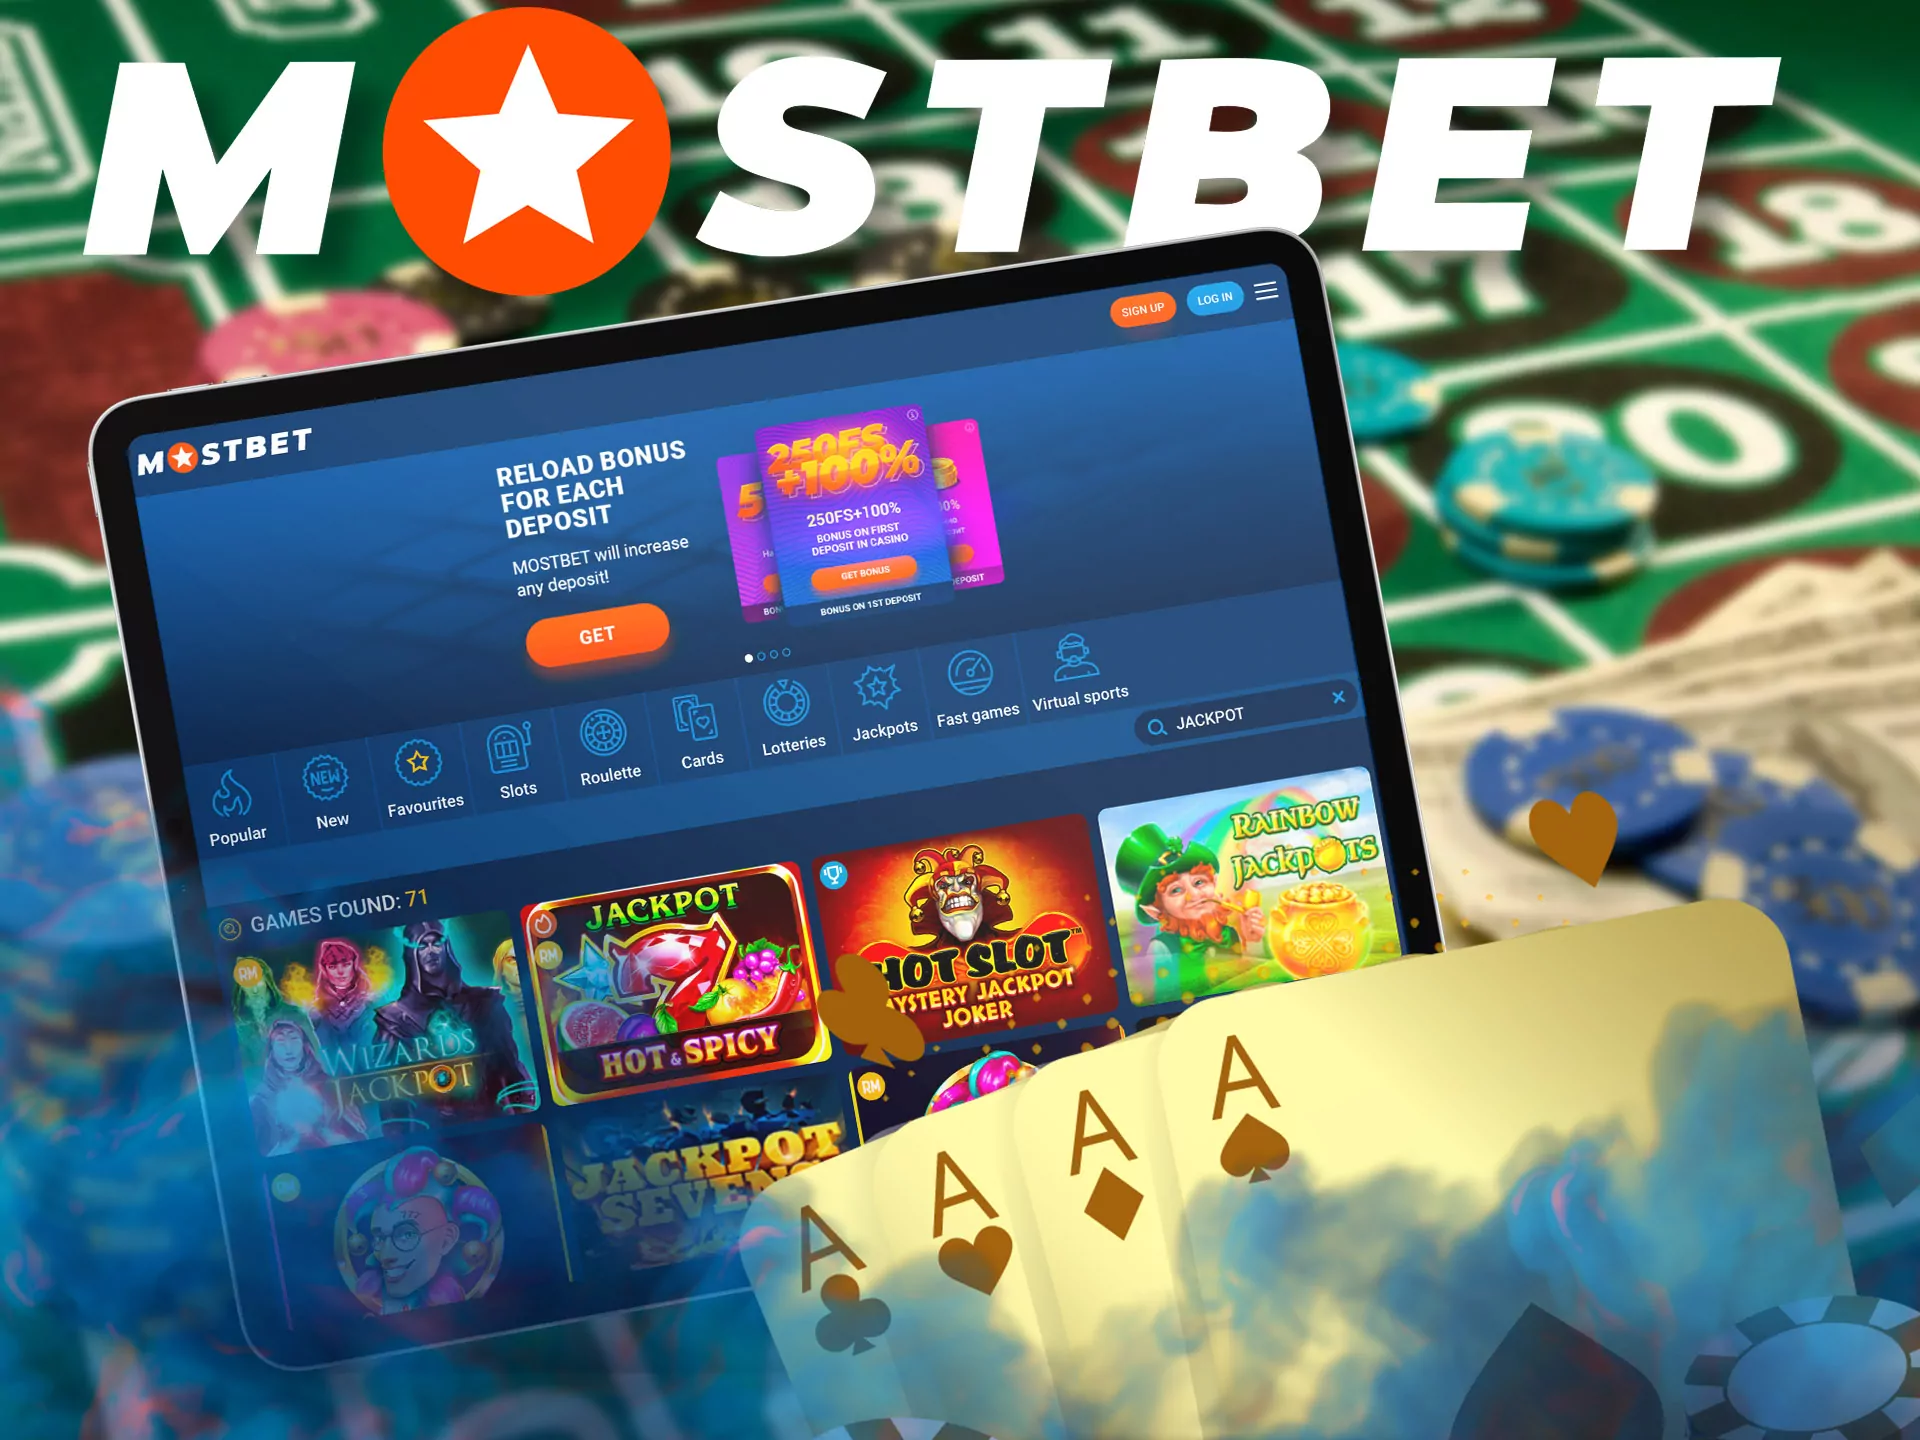 Any user can win big, you just need to place one bet every hour on the Mostbet platform.